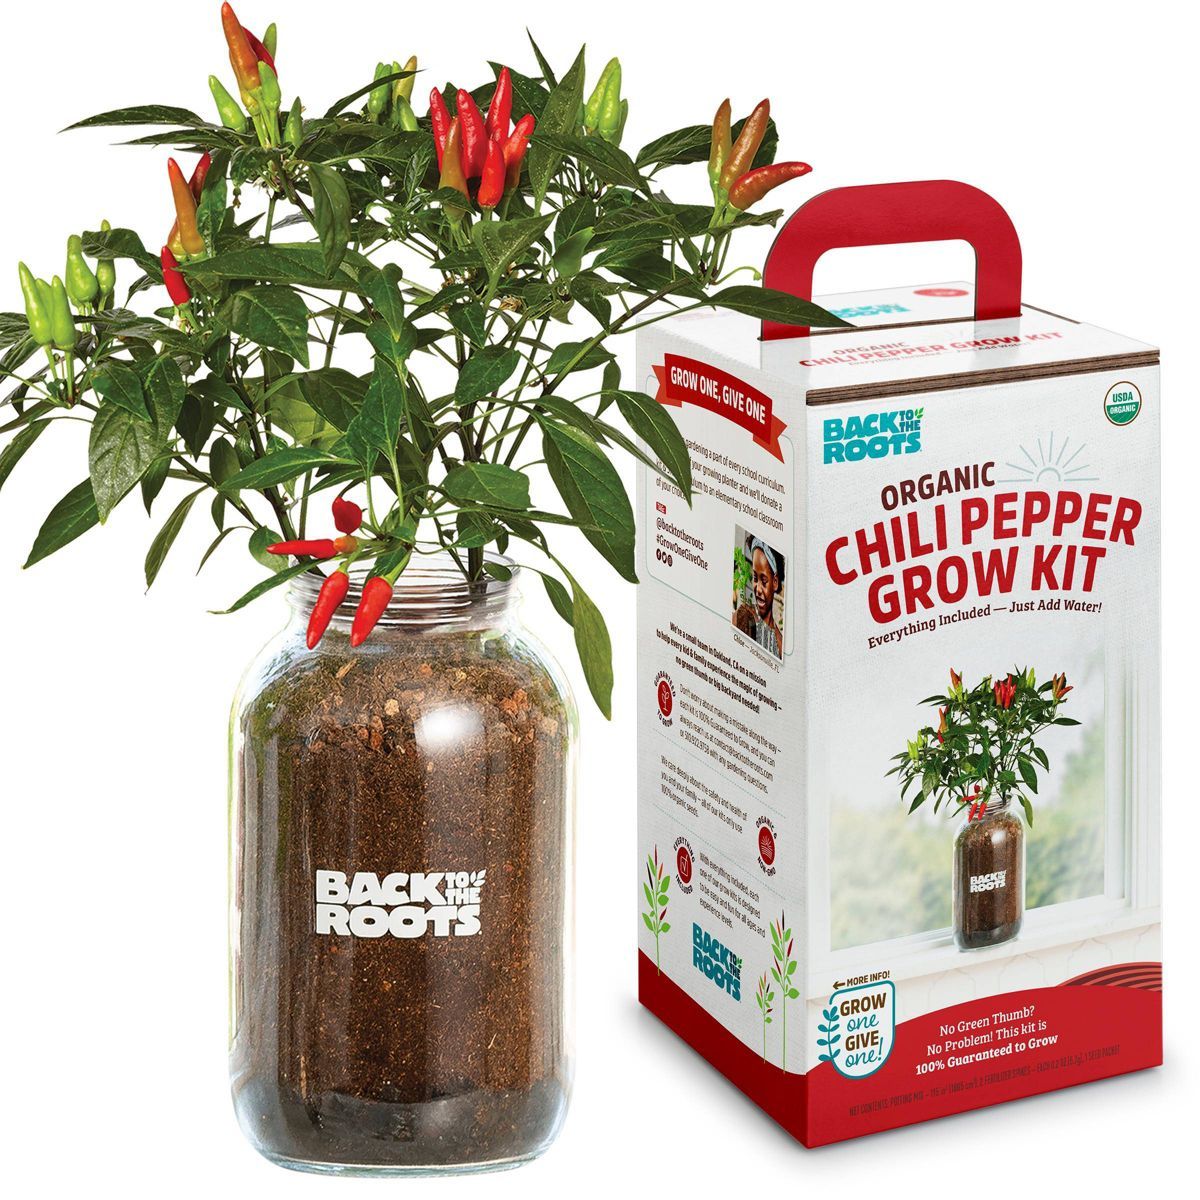 Back to the Roots Organic Chili Pepper Grow Kit | Target